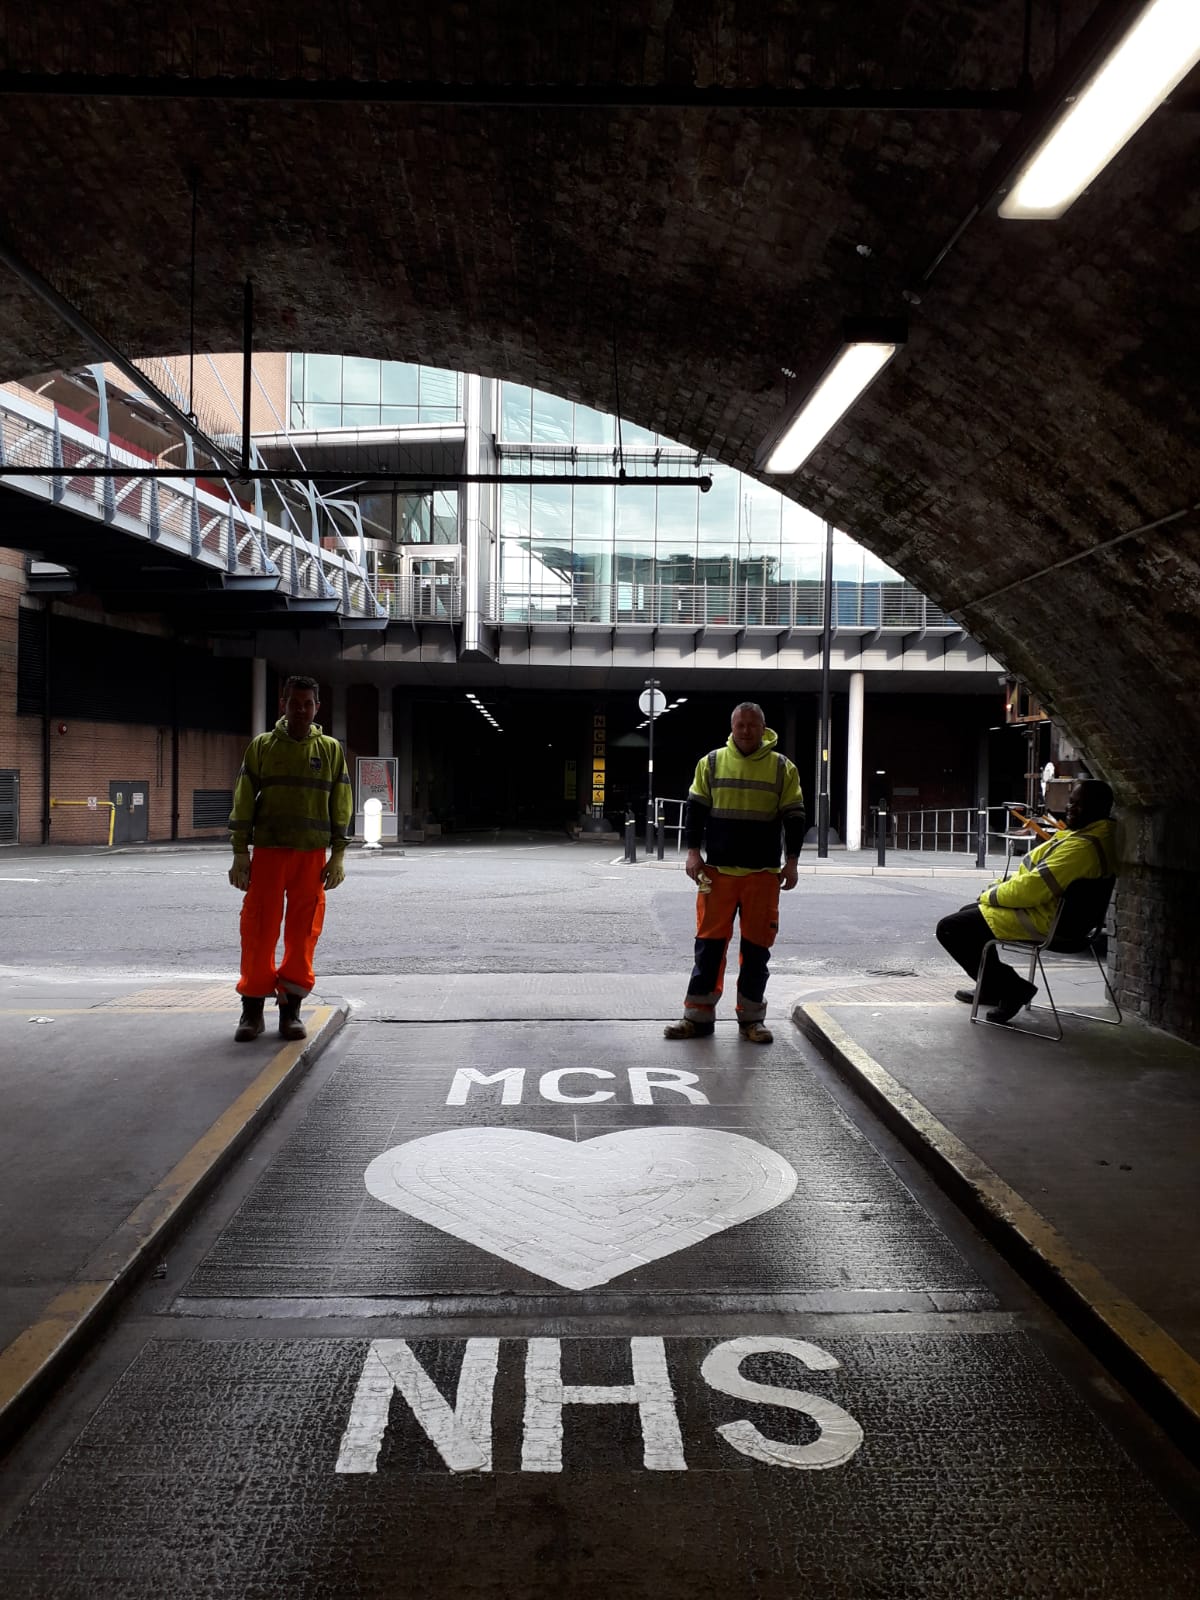 A road marking in Manchester in support of the NHS